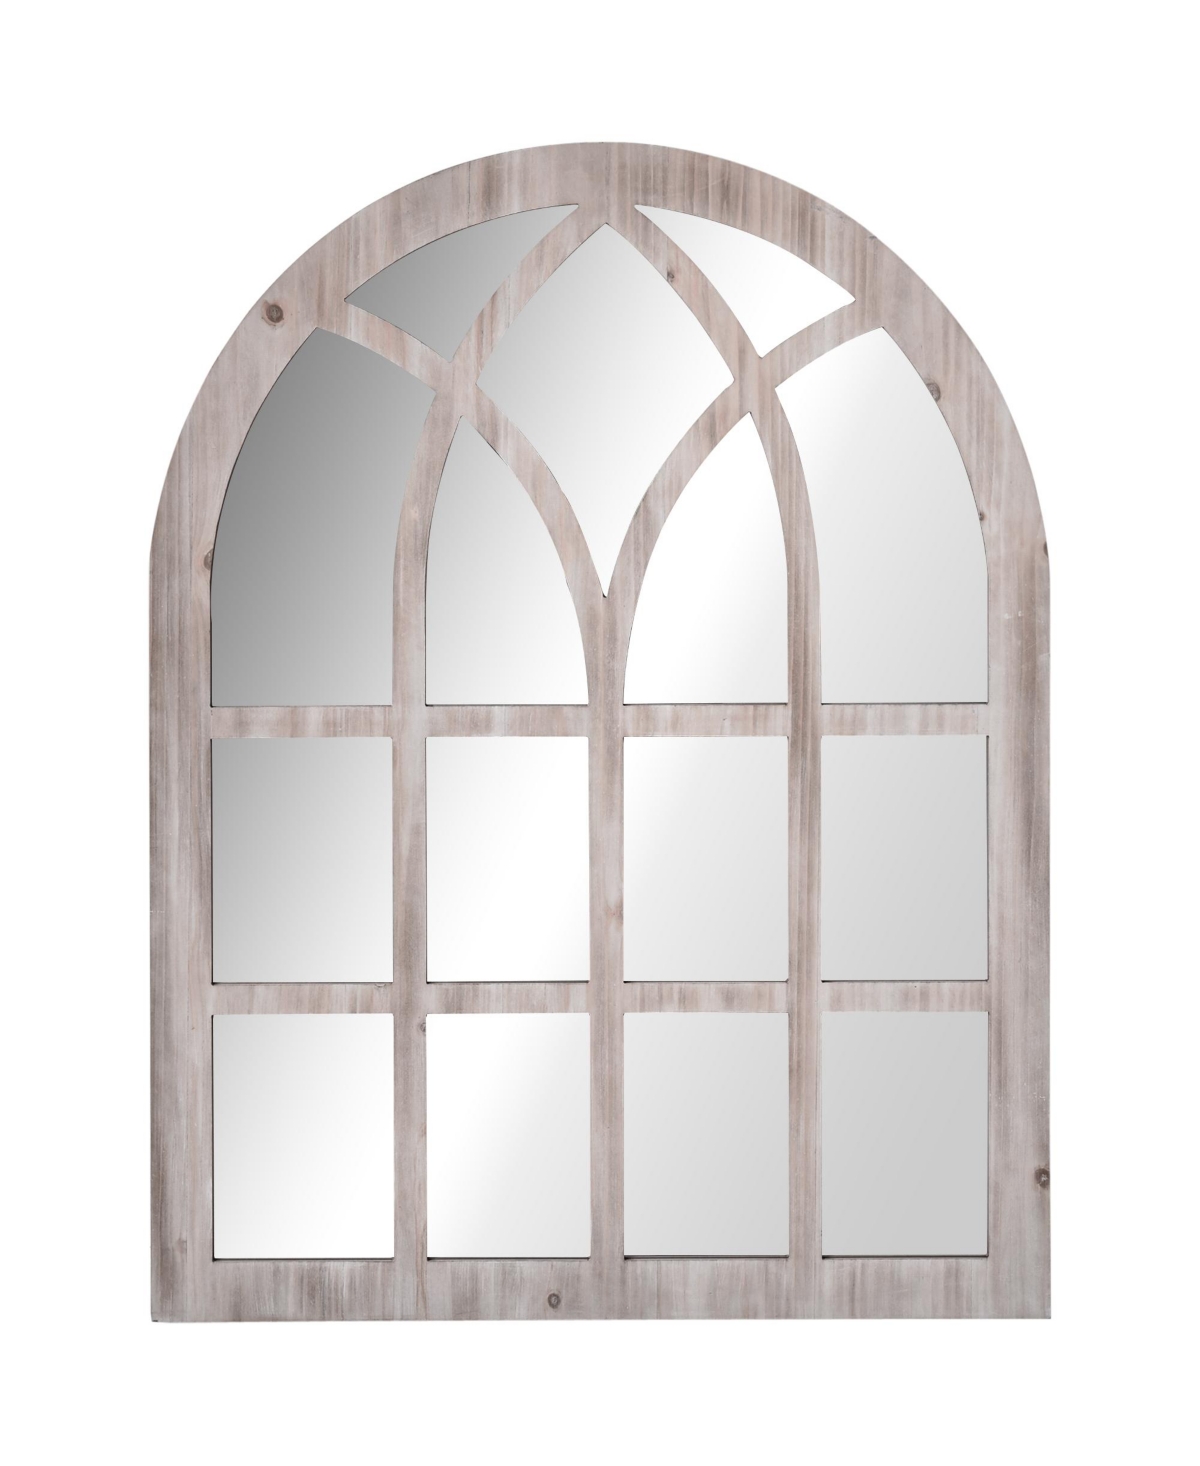 41" x 31.5" Rustic Wall Mirror, Arch Window Mirror for Wall in Living Room, Bedroom, Natural - Natural wood